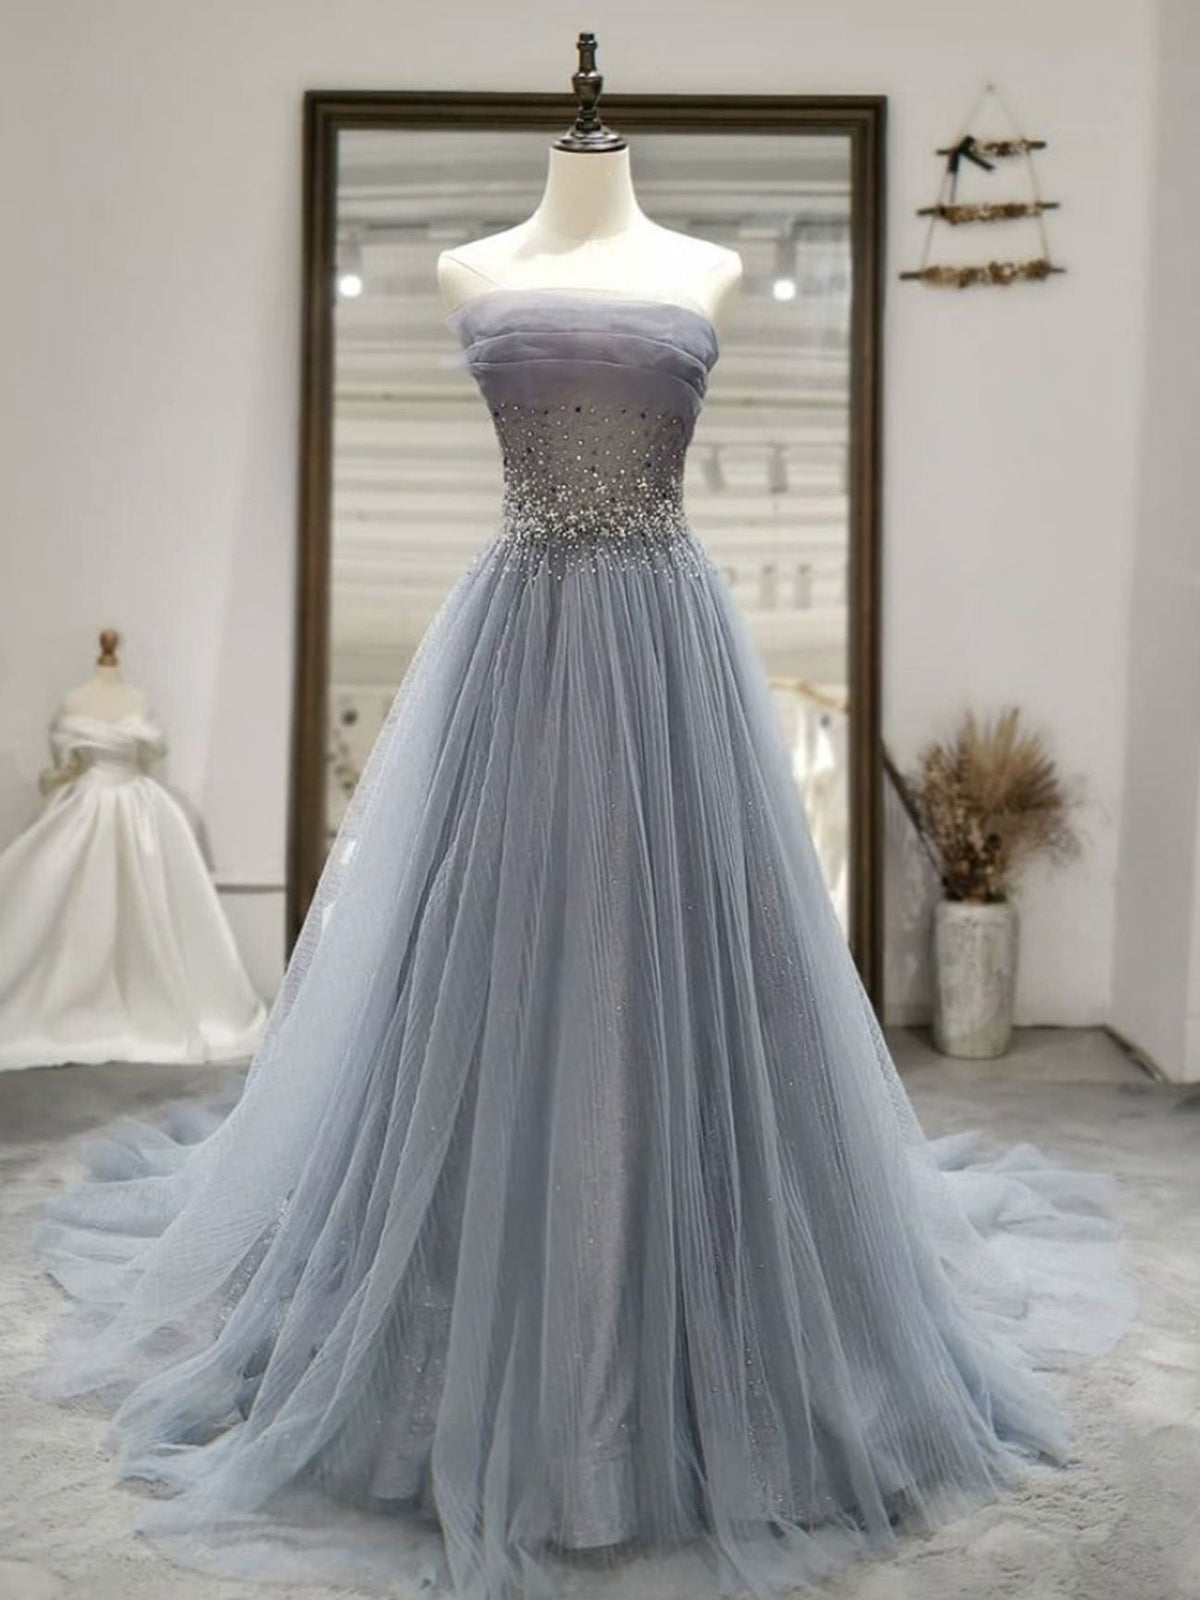 Strapless Silver Grey Prom Dresses Ball Gown Lace Sweet 16 Dress FD117 –  Viniodress